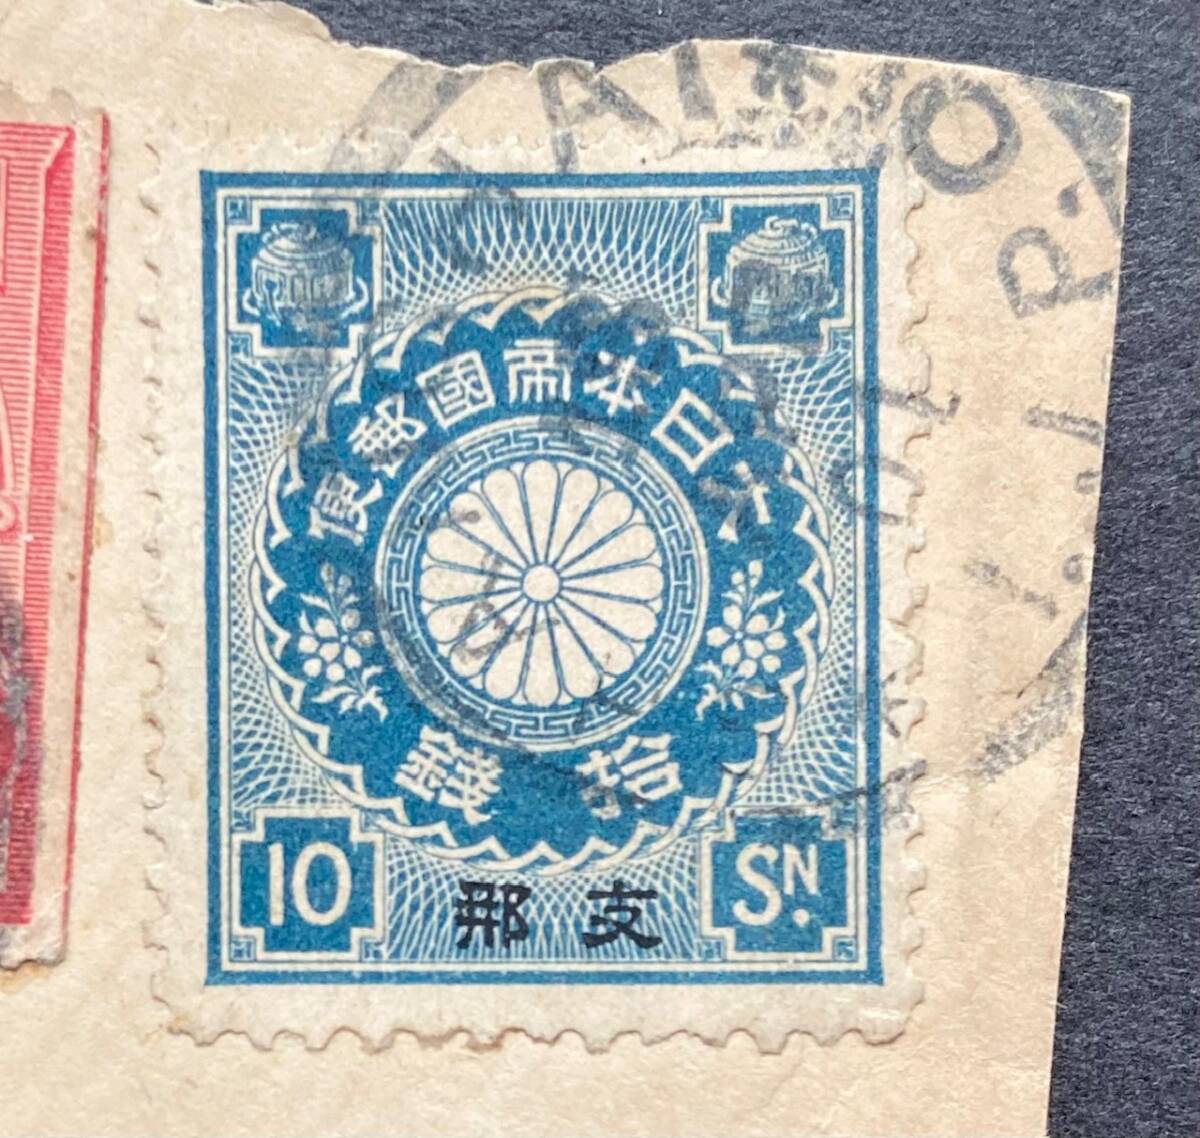 [ Mali hole various island * America . Guam ]1899 year issue GUAM.. stamp 2c (Sc#2). chrysanthemum stamp main . character go in 10 sen ..1901 year on sea . writing seal pushed on piece * beautiful goods 